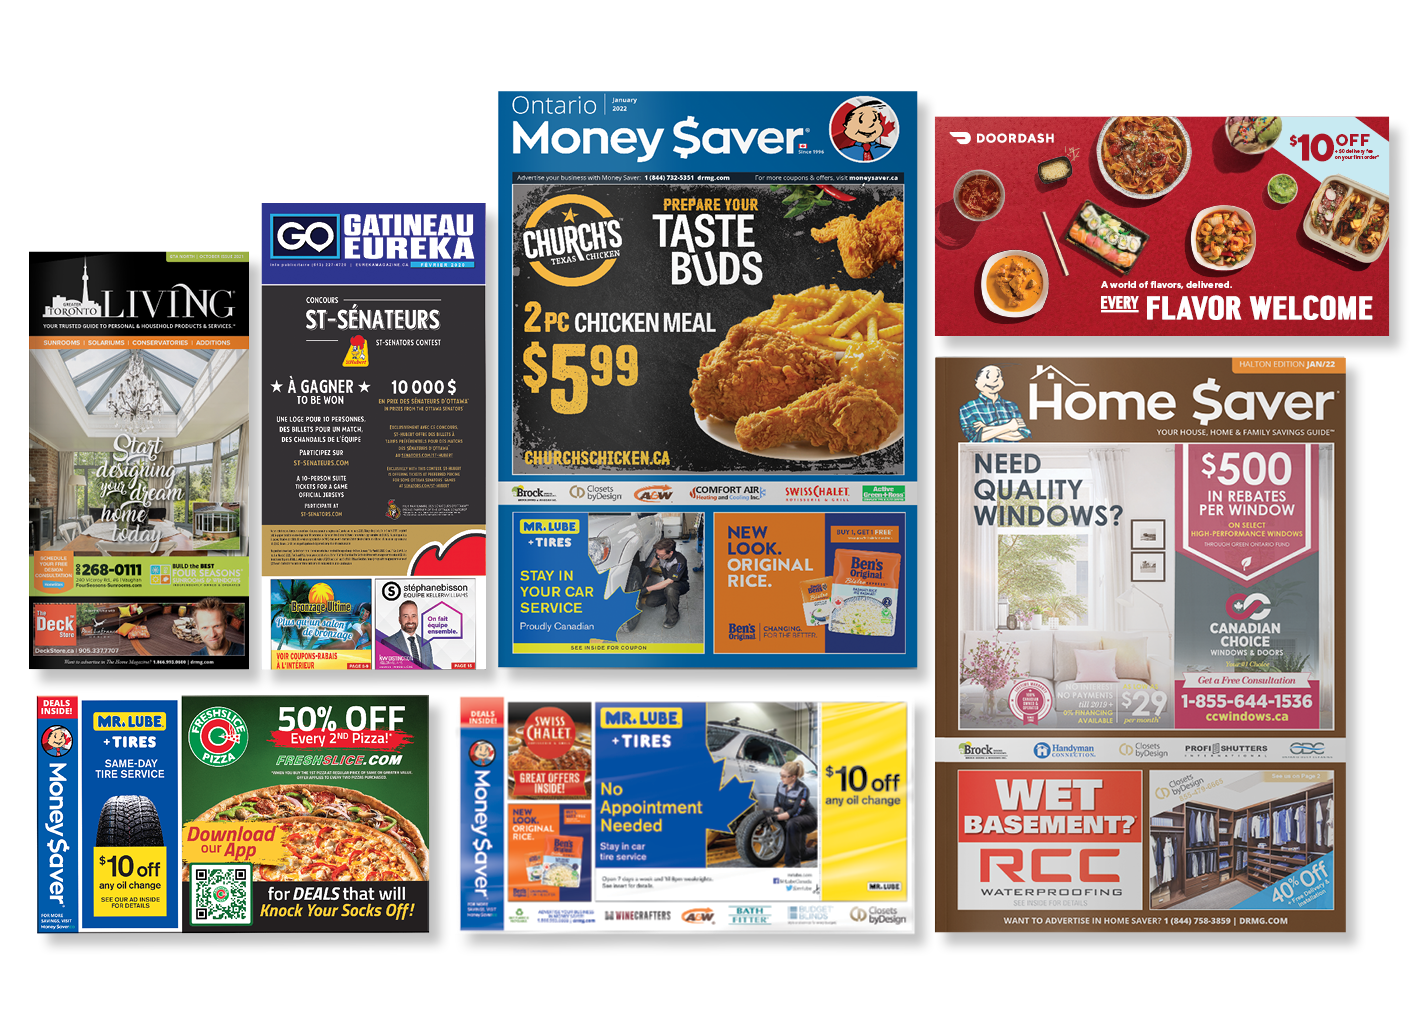 Group of magazine products including Greater Toronto Living, Door Dash postcard, Money Saver Magazine, Home Saver, Money Saver Envelope Wrap and Go Gatineau